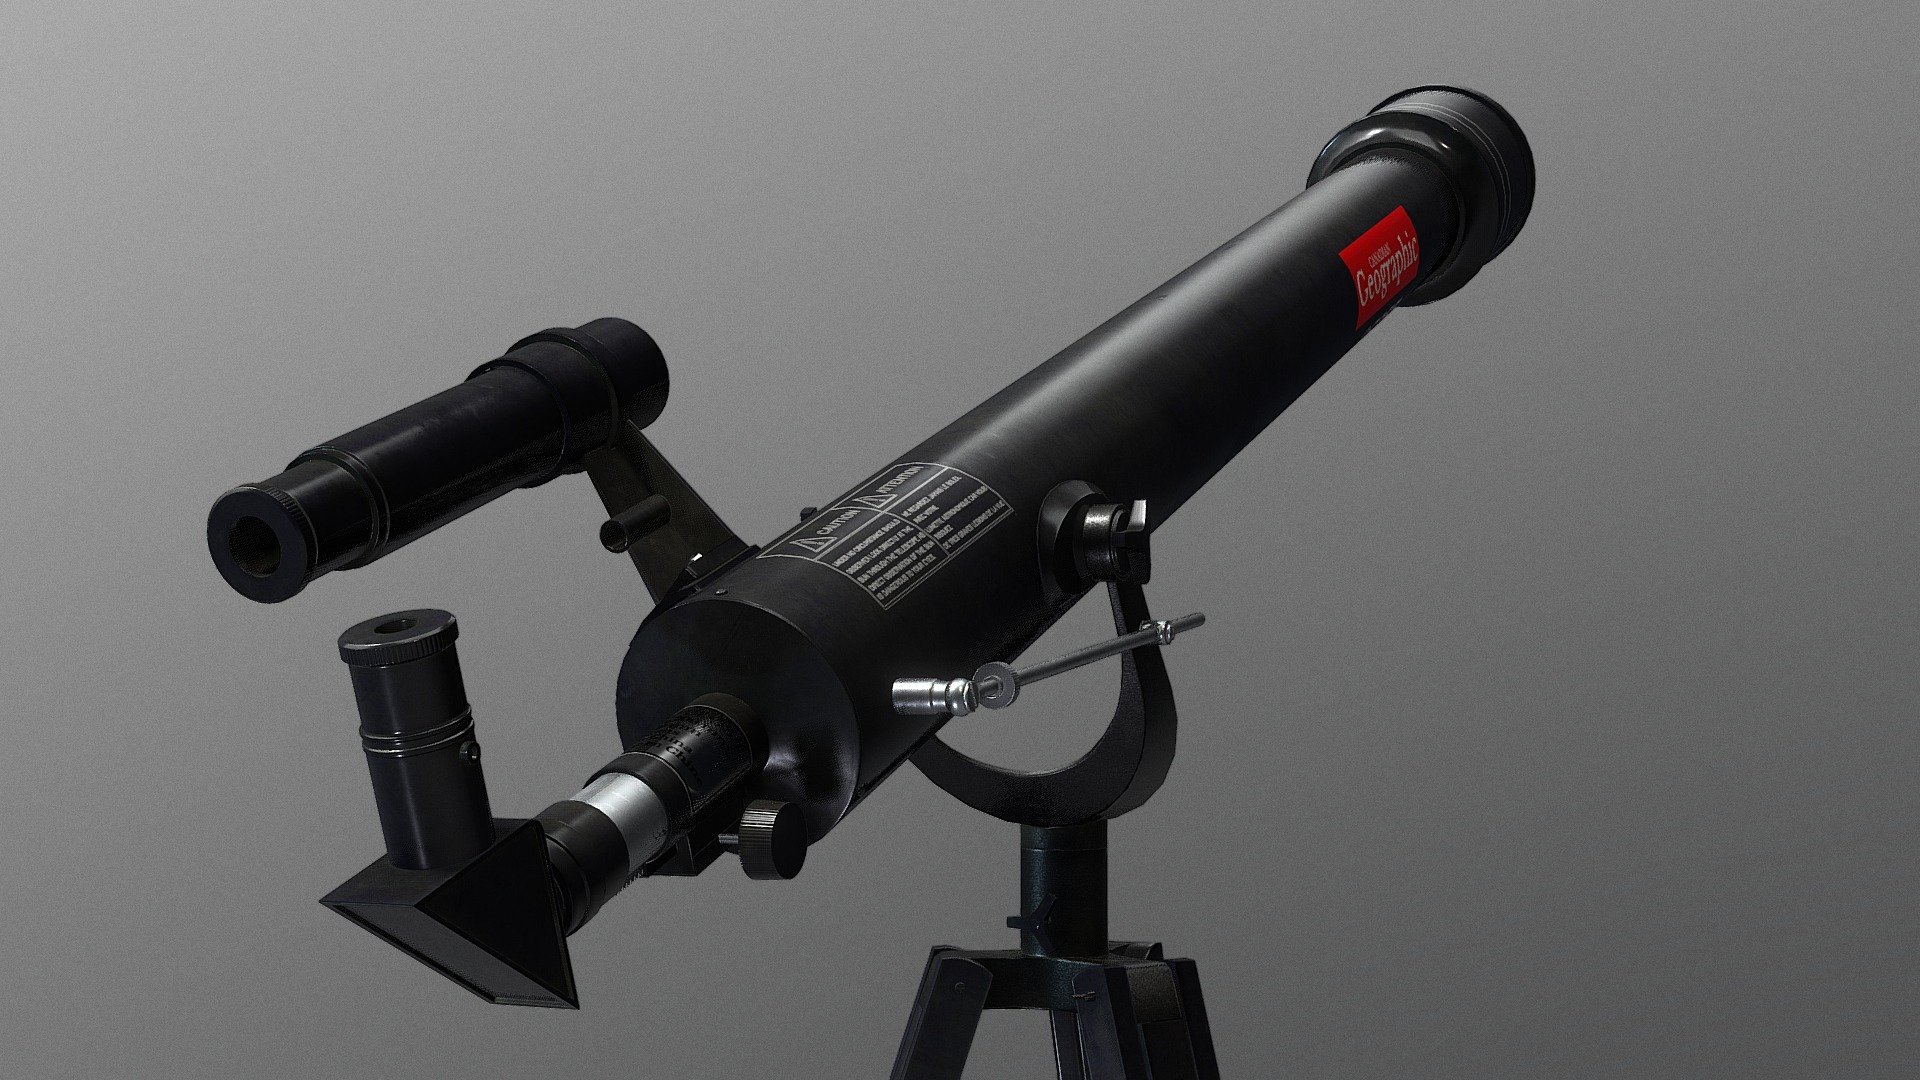 Modeled after the Telescope I was Gifted when I was 8 Years old - Telescope - 3D model by Robert Allsopp (@robertallsopp) 3d model